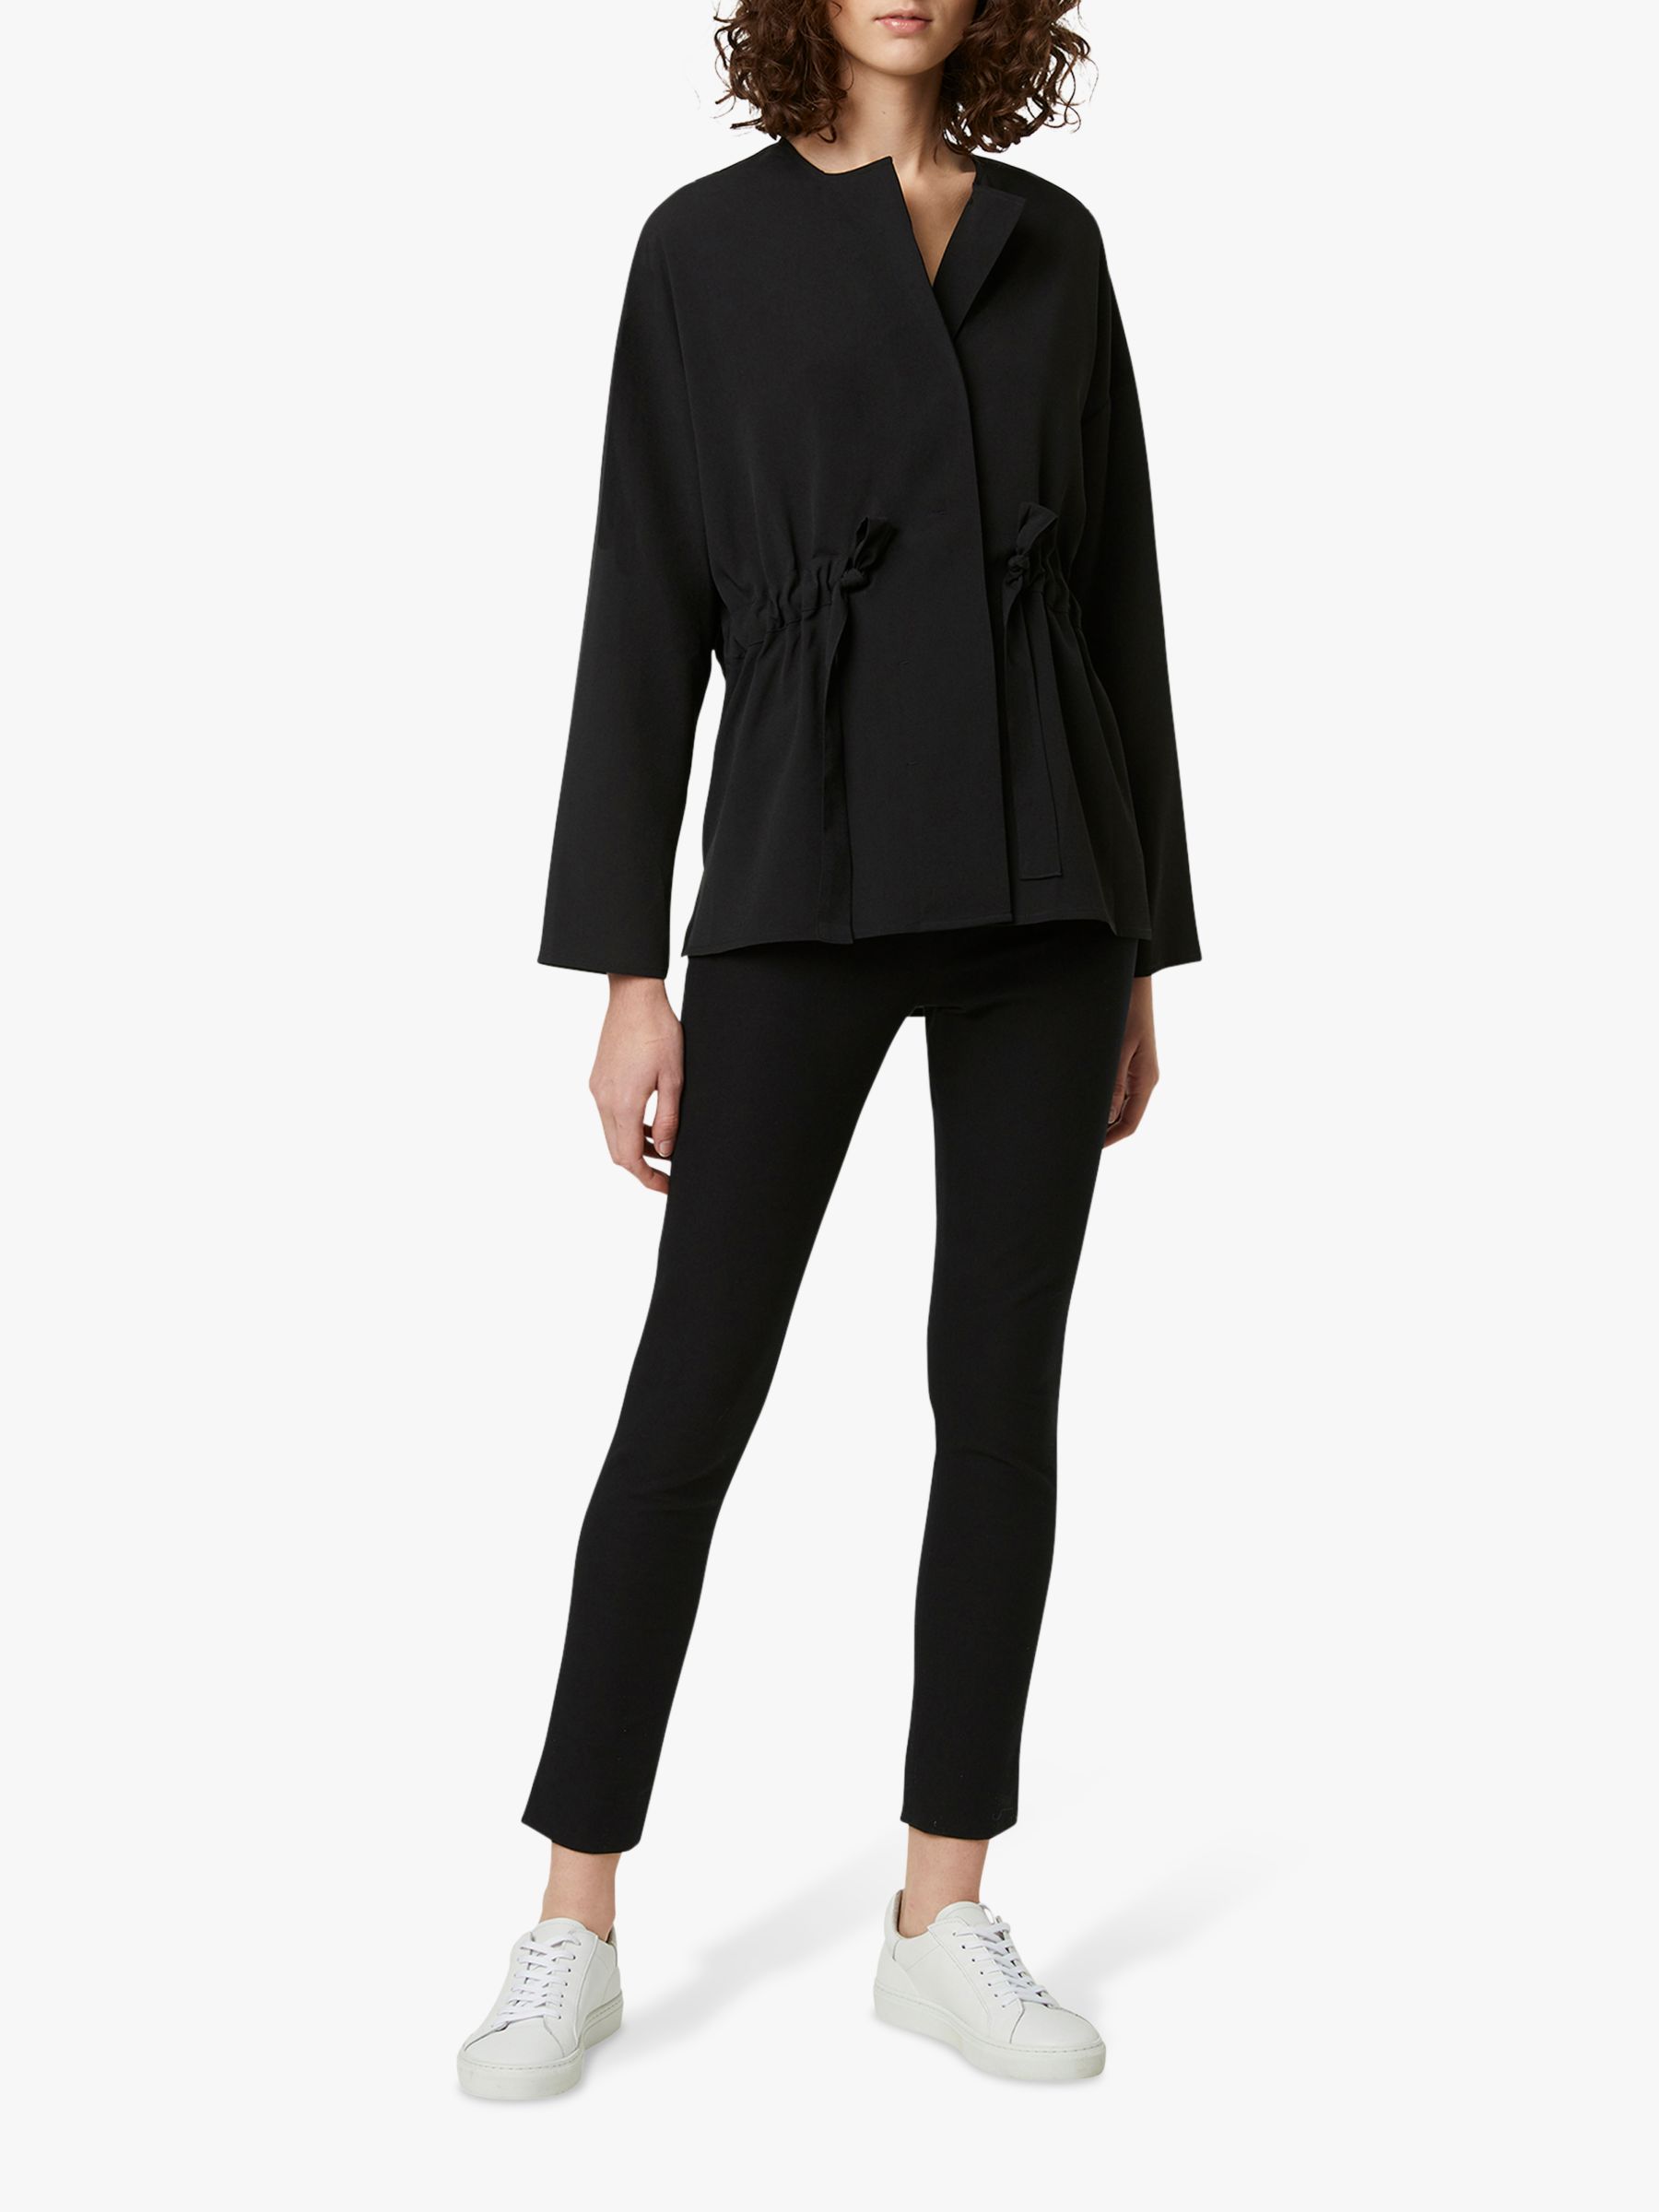 French Connection Crepe Gathered Waist Blouse, Black, M